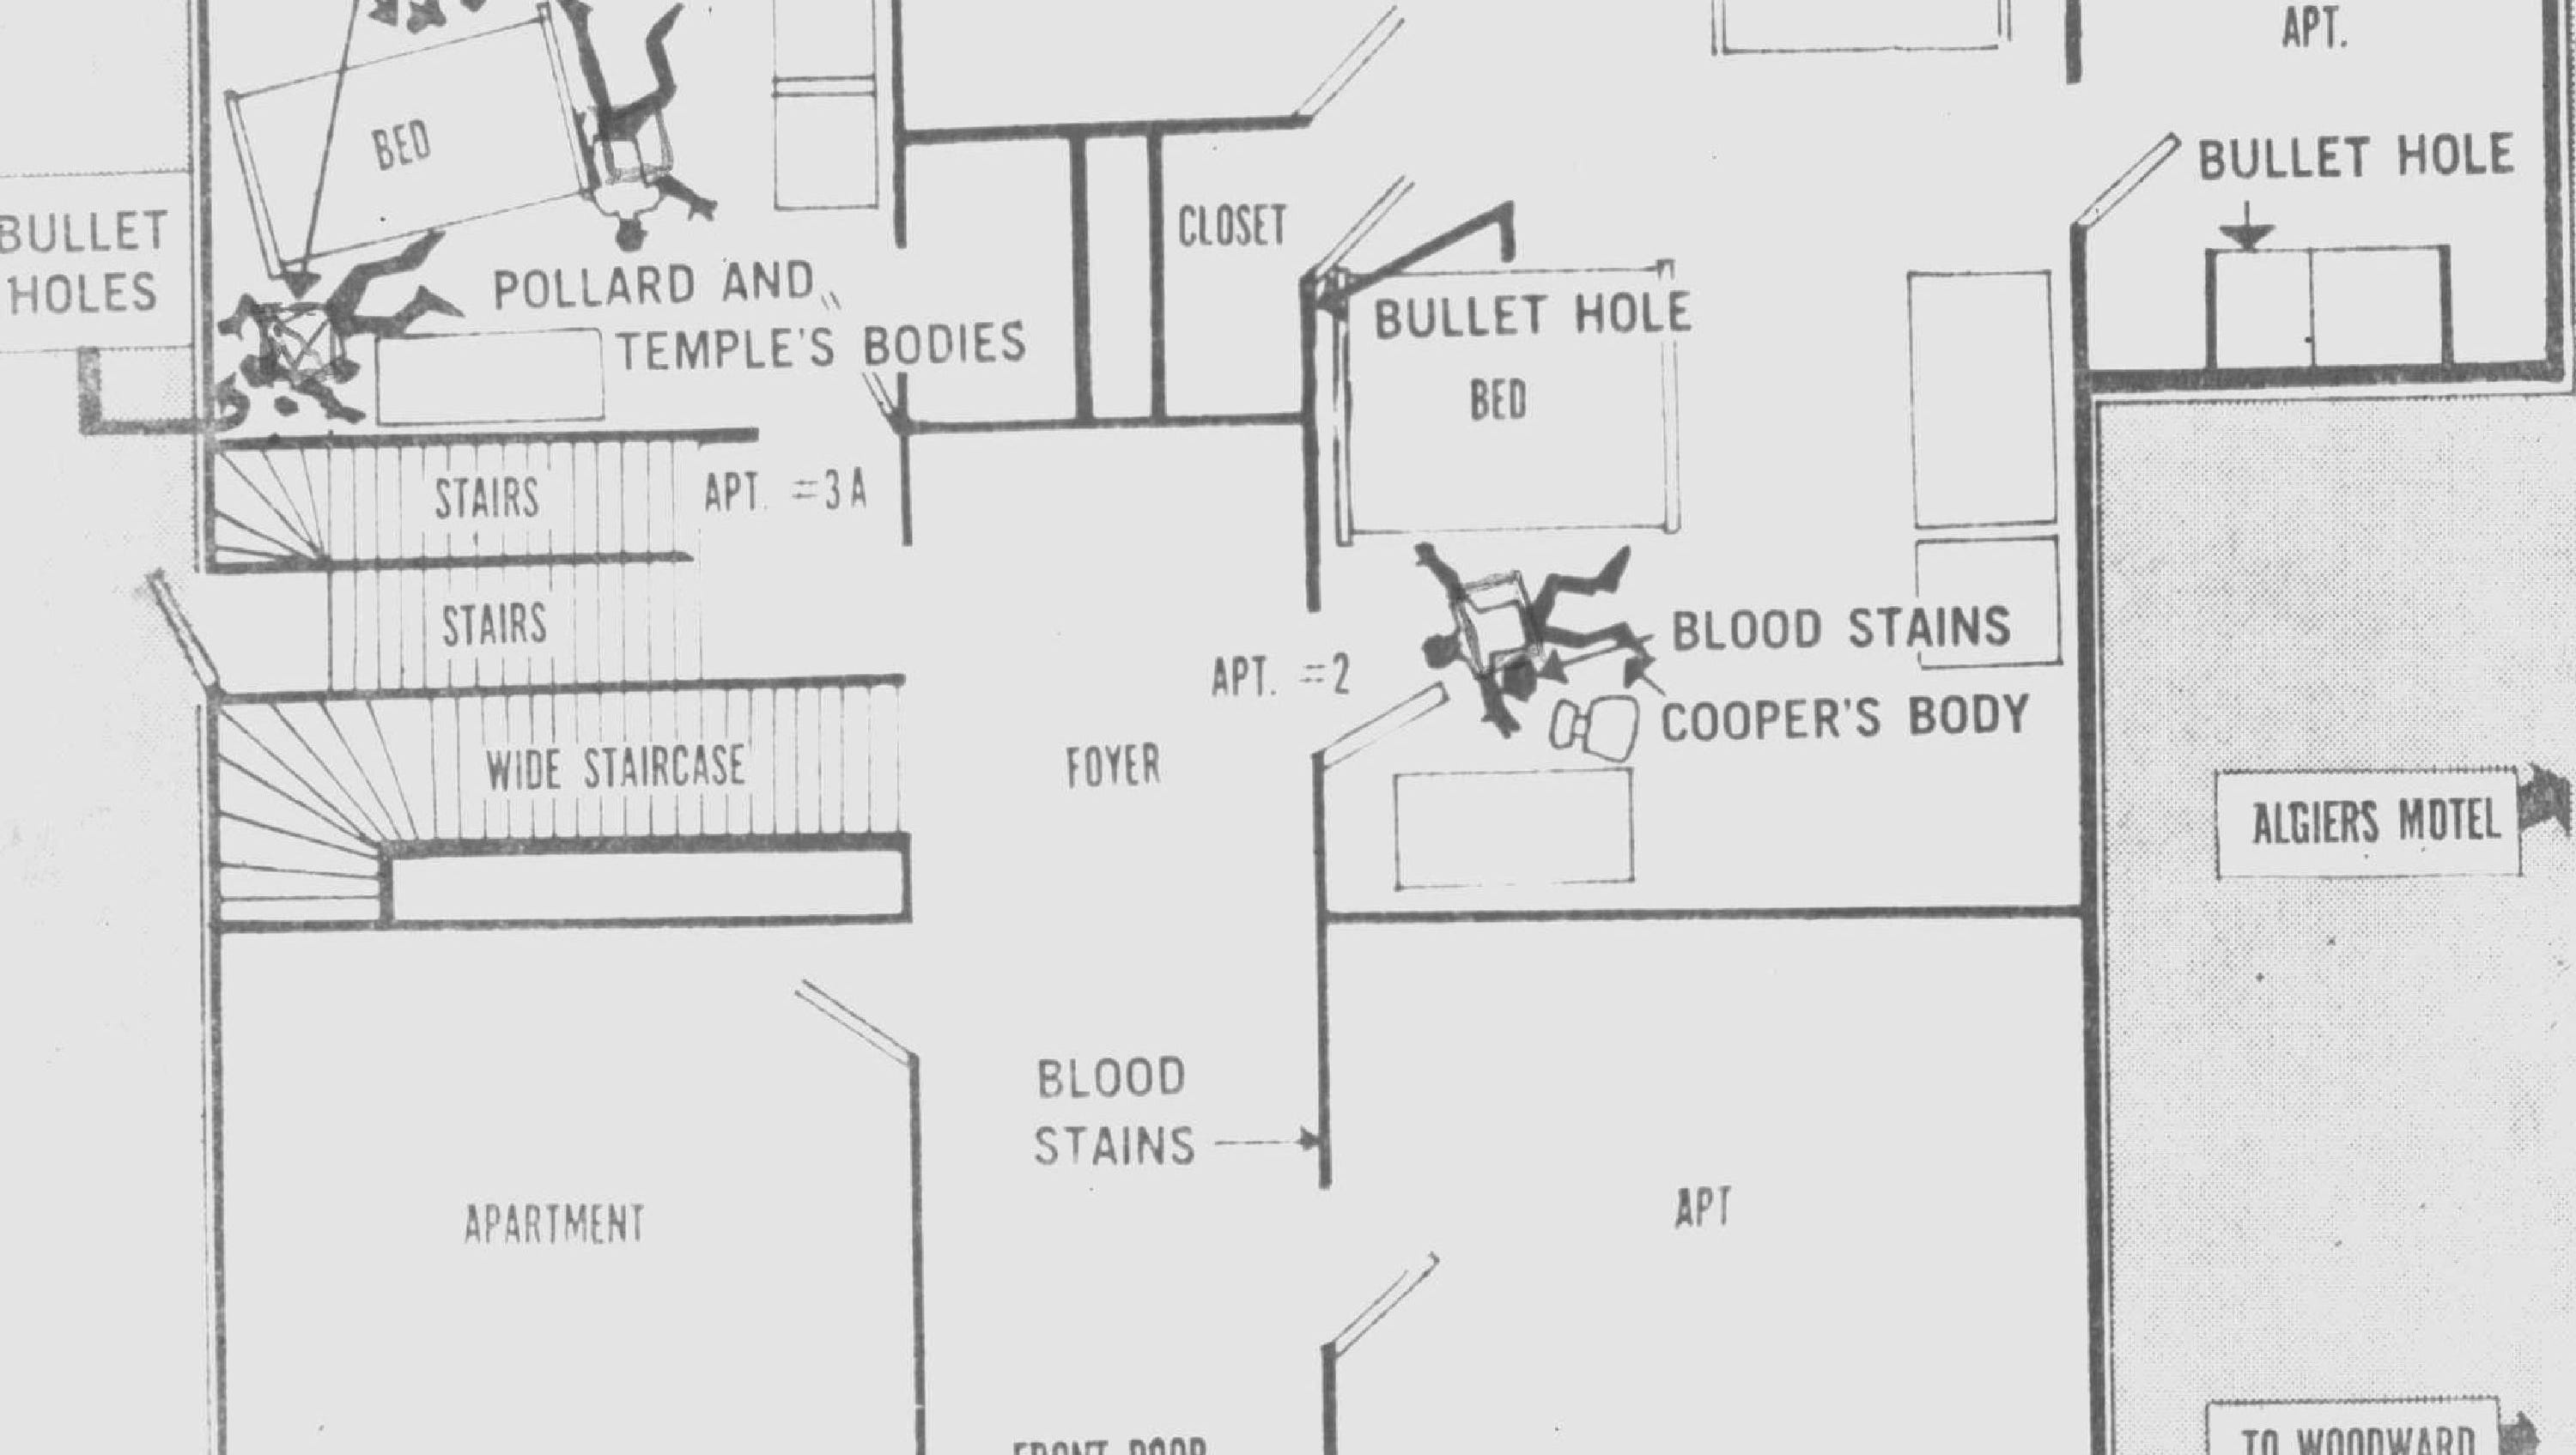 A diagram shows the position of the bodies found in the Algiers Motel annex, located behind the motel.